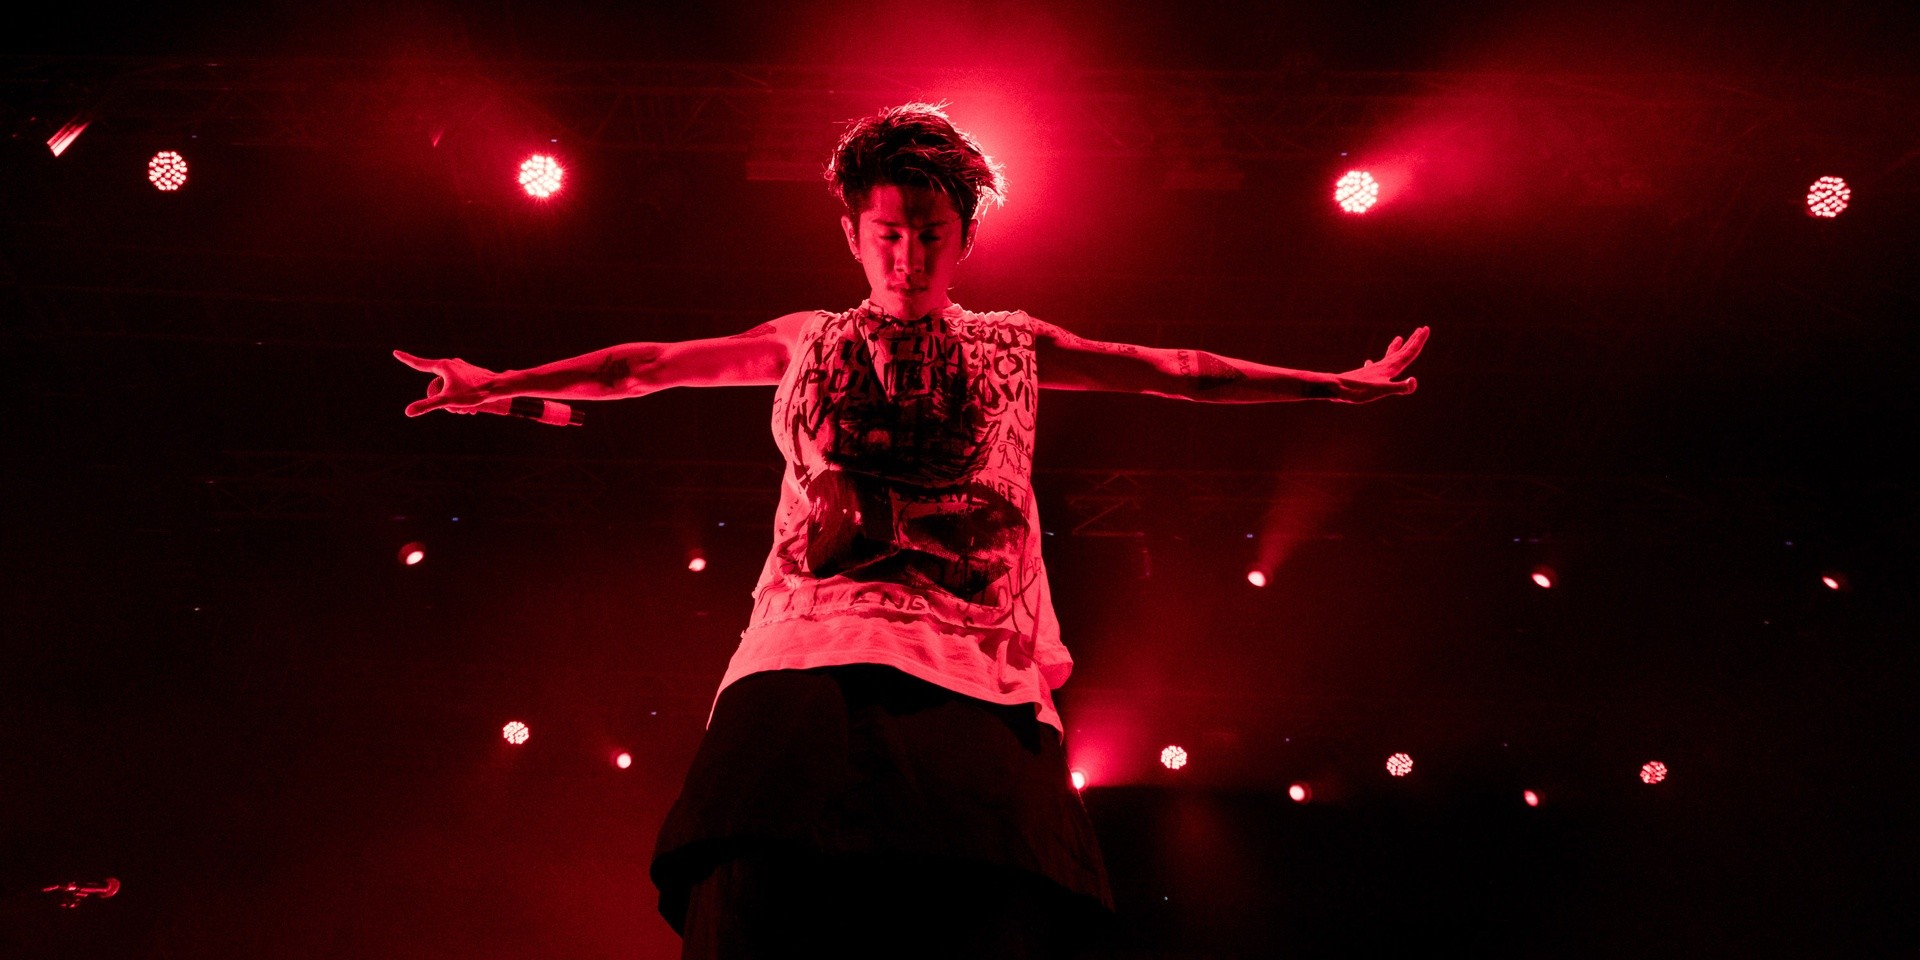 GIG REPORT: ONE OK ROCK reclaims Singapore fanbase with stunning third show